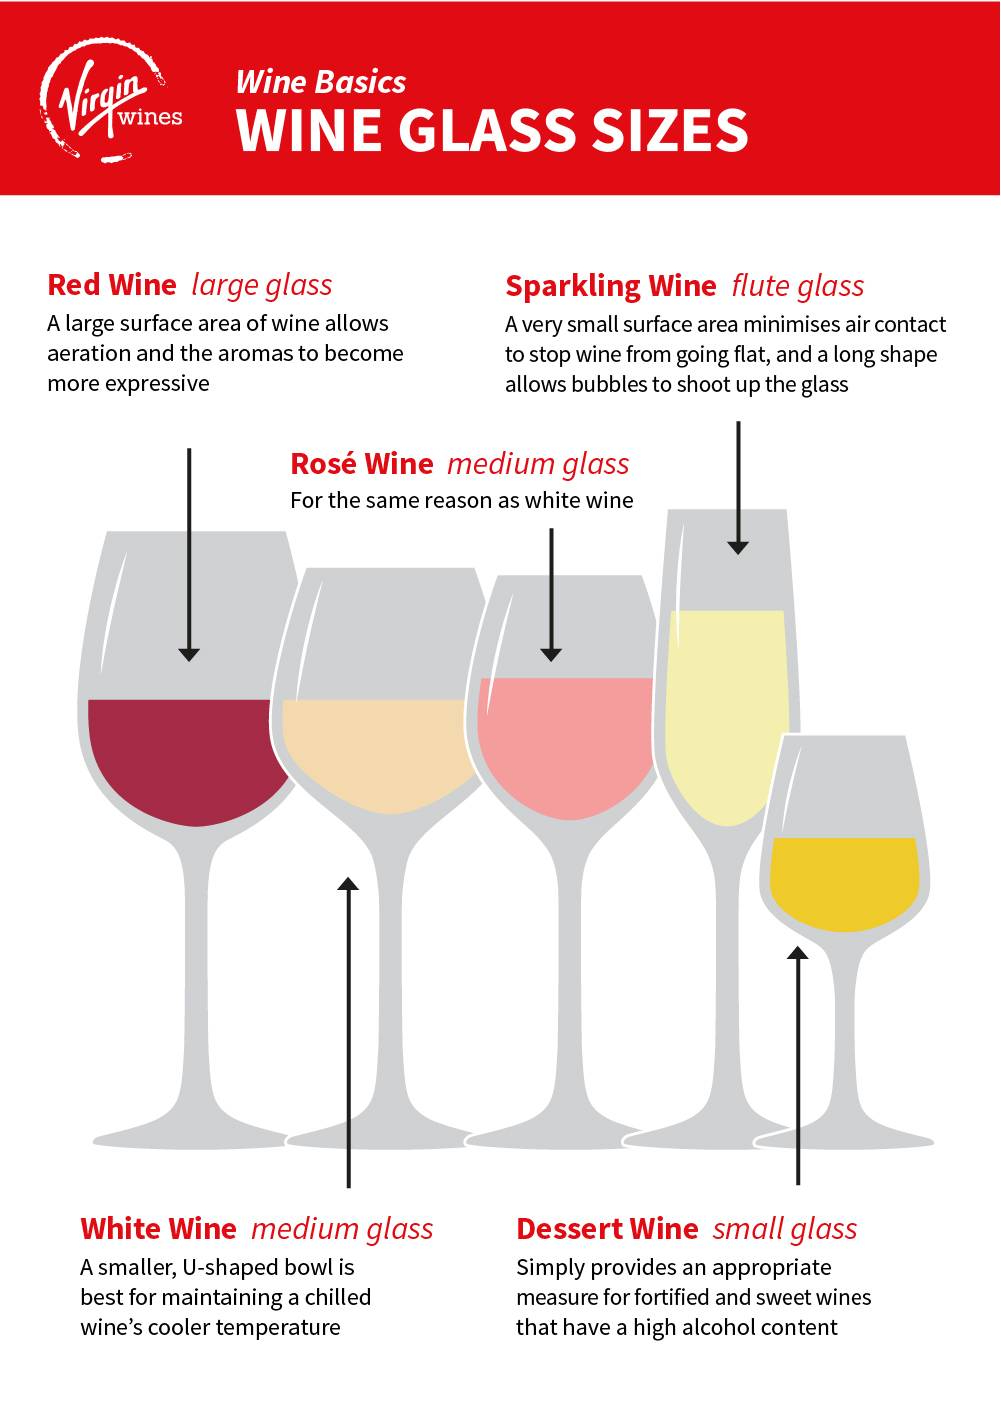 https://www.virginwines.co.uk/hub/wp-content/uploads/2022/05/Infographic-by-Virgin-Wines-showing-the-best-glass-sizes-and-shapes-for-each-style-of-wine.jpg